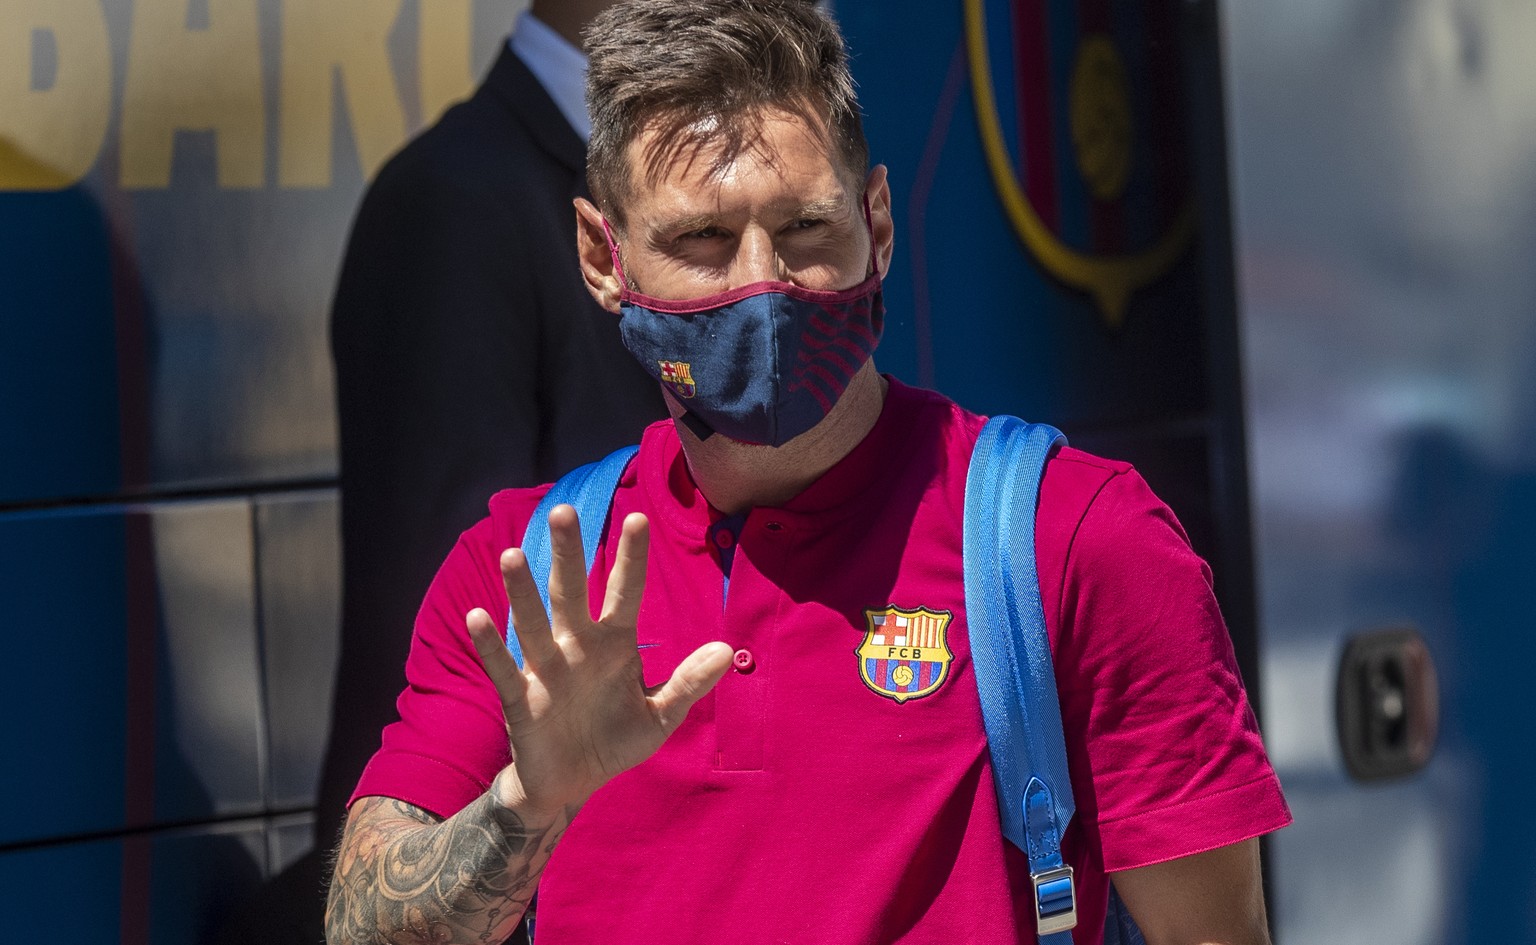 FILE - In this Aug. 13, 2020 file photo, Barcelona&#039;s Lionel Messi waves as he arrives at the team hotel in Lisbon, Portugal. Lionel Messi has told Barcelona he wants to leave the club after nearl ...